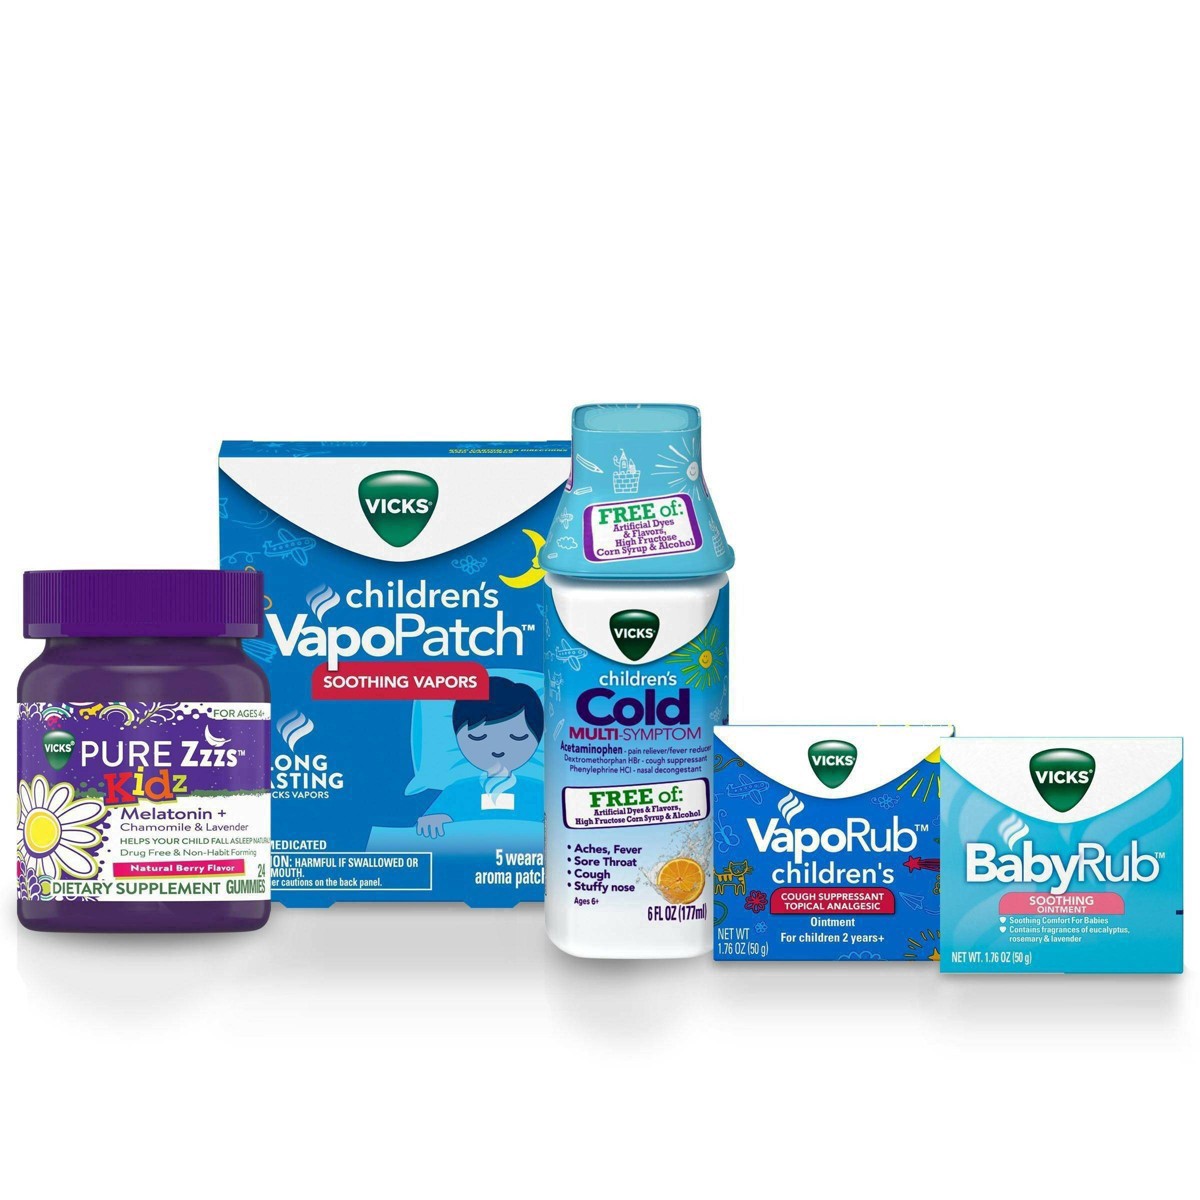 slide 5 of 37, Vicks Children's VapoPatch with Long Lasting Soothing Vapors - Menthol - 5ct, 5 ct